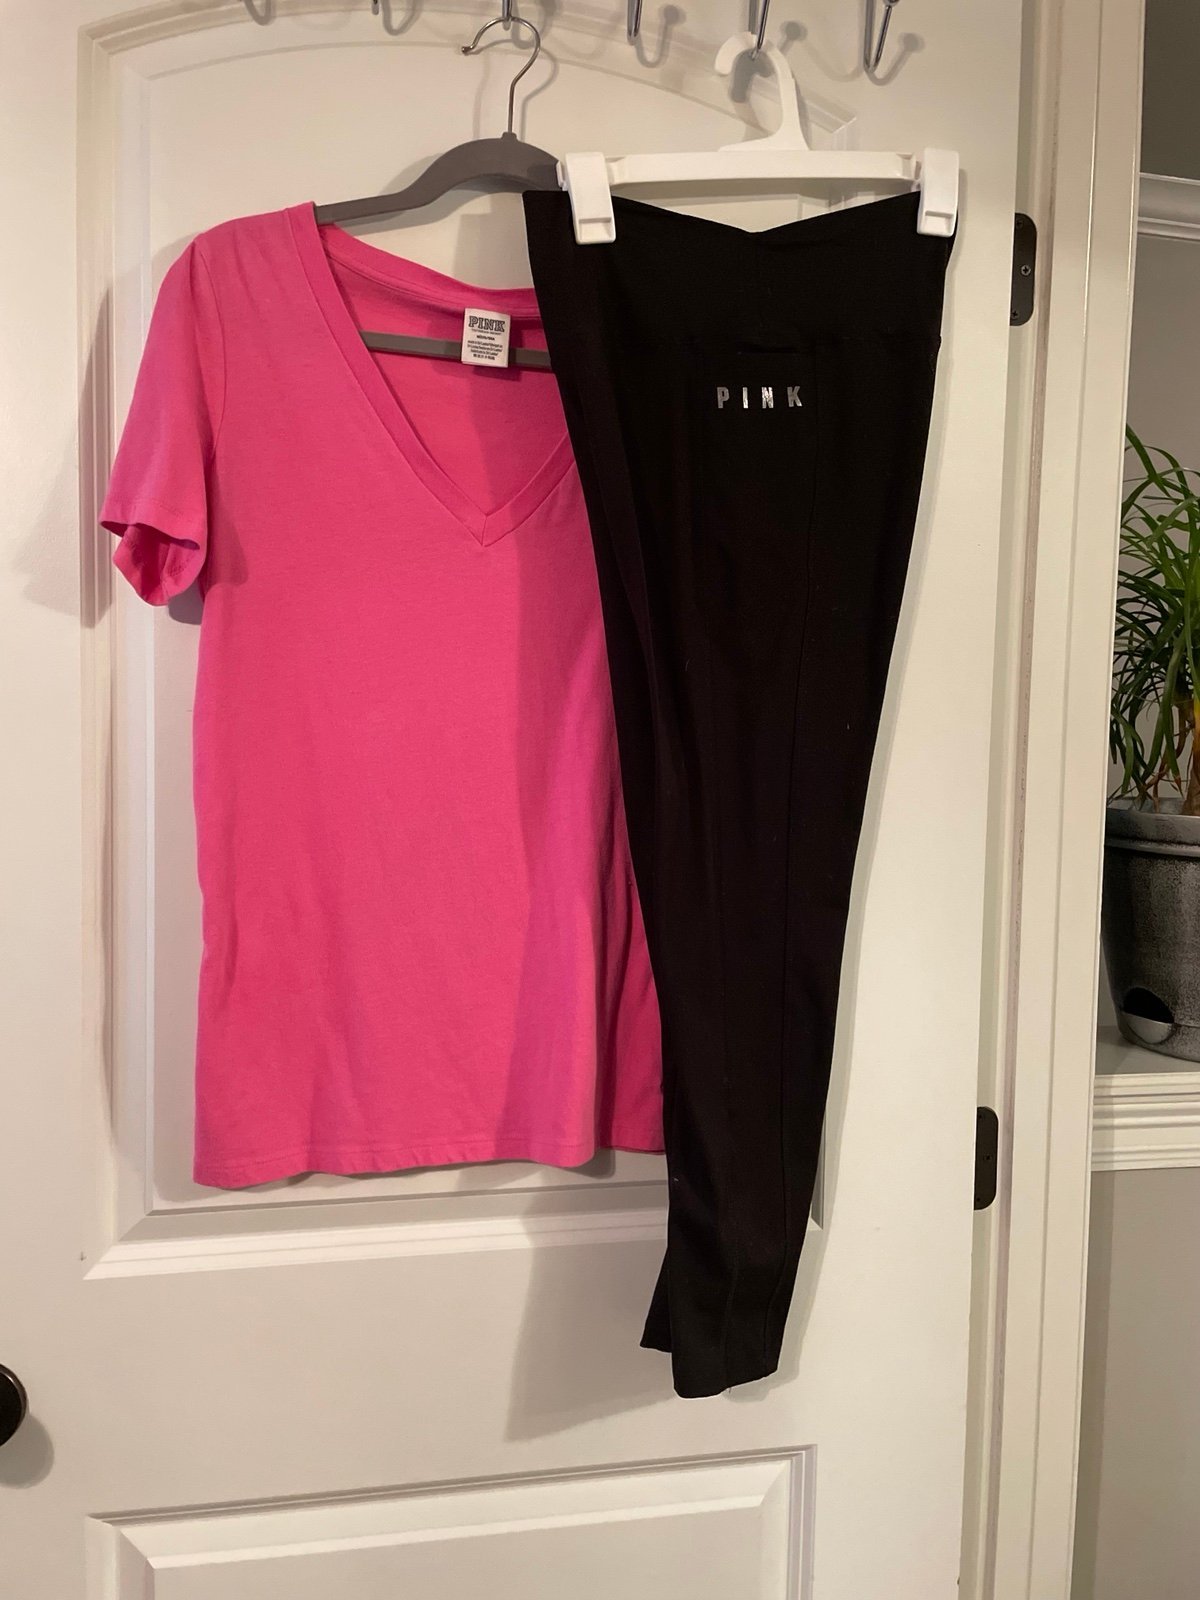 Cheap PINK vs outfit or individually mq32wd1IR Everyday